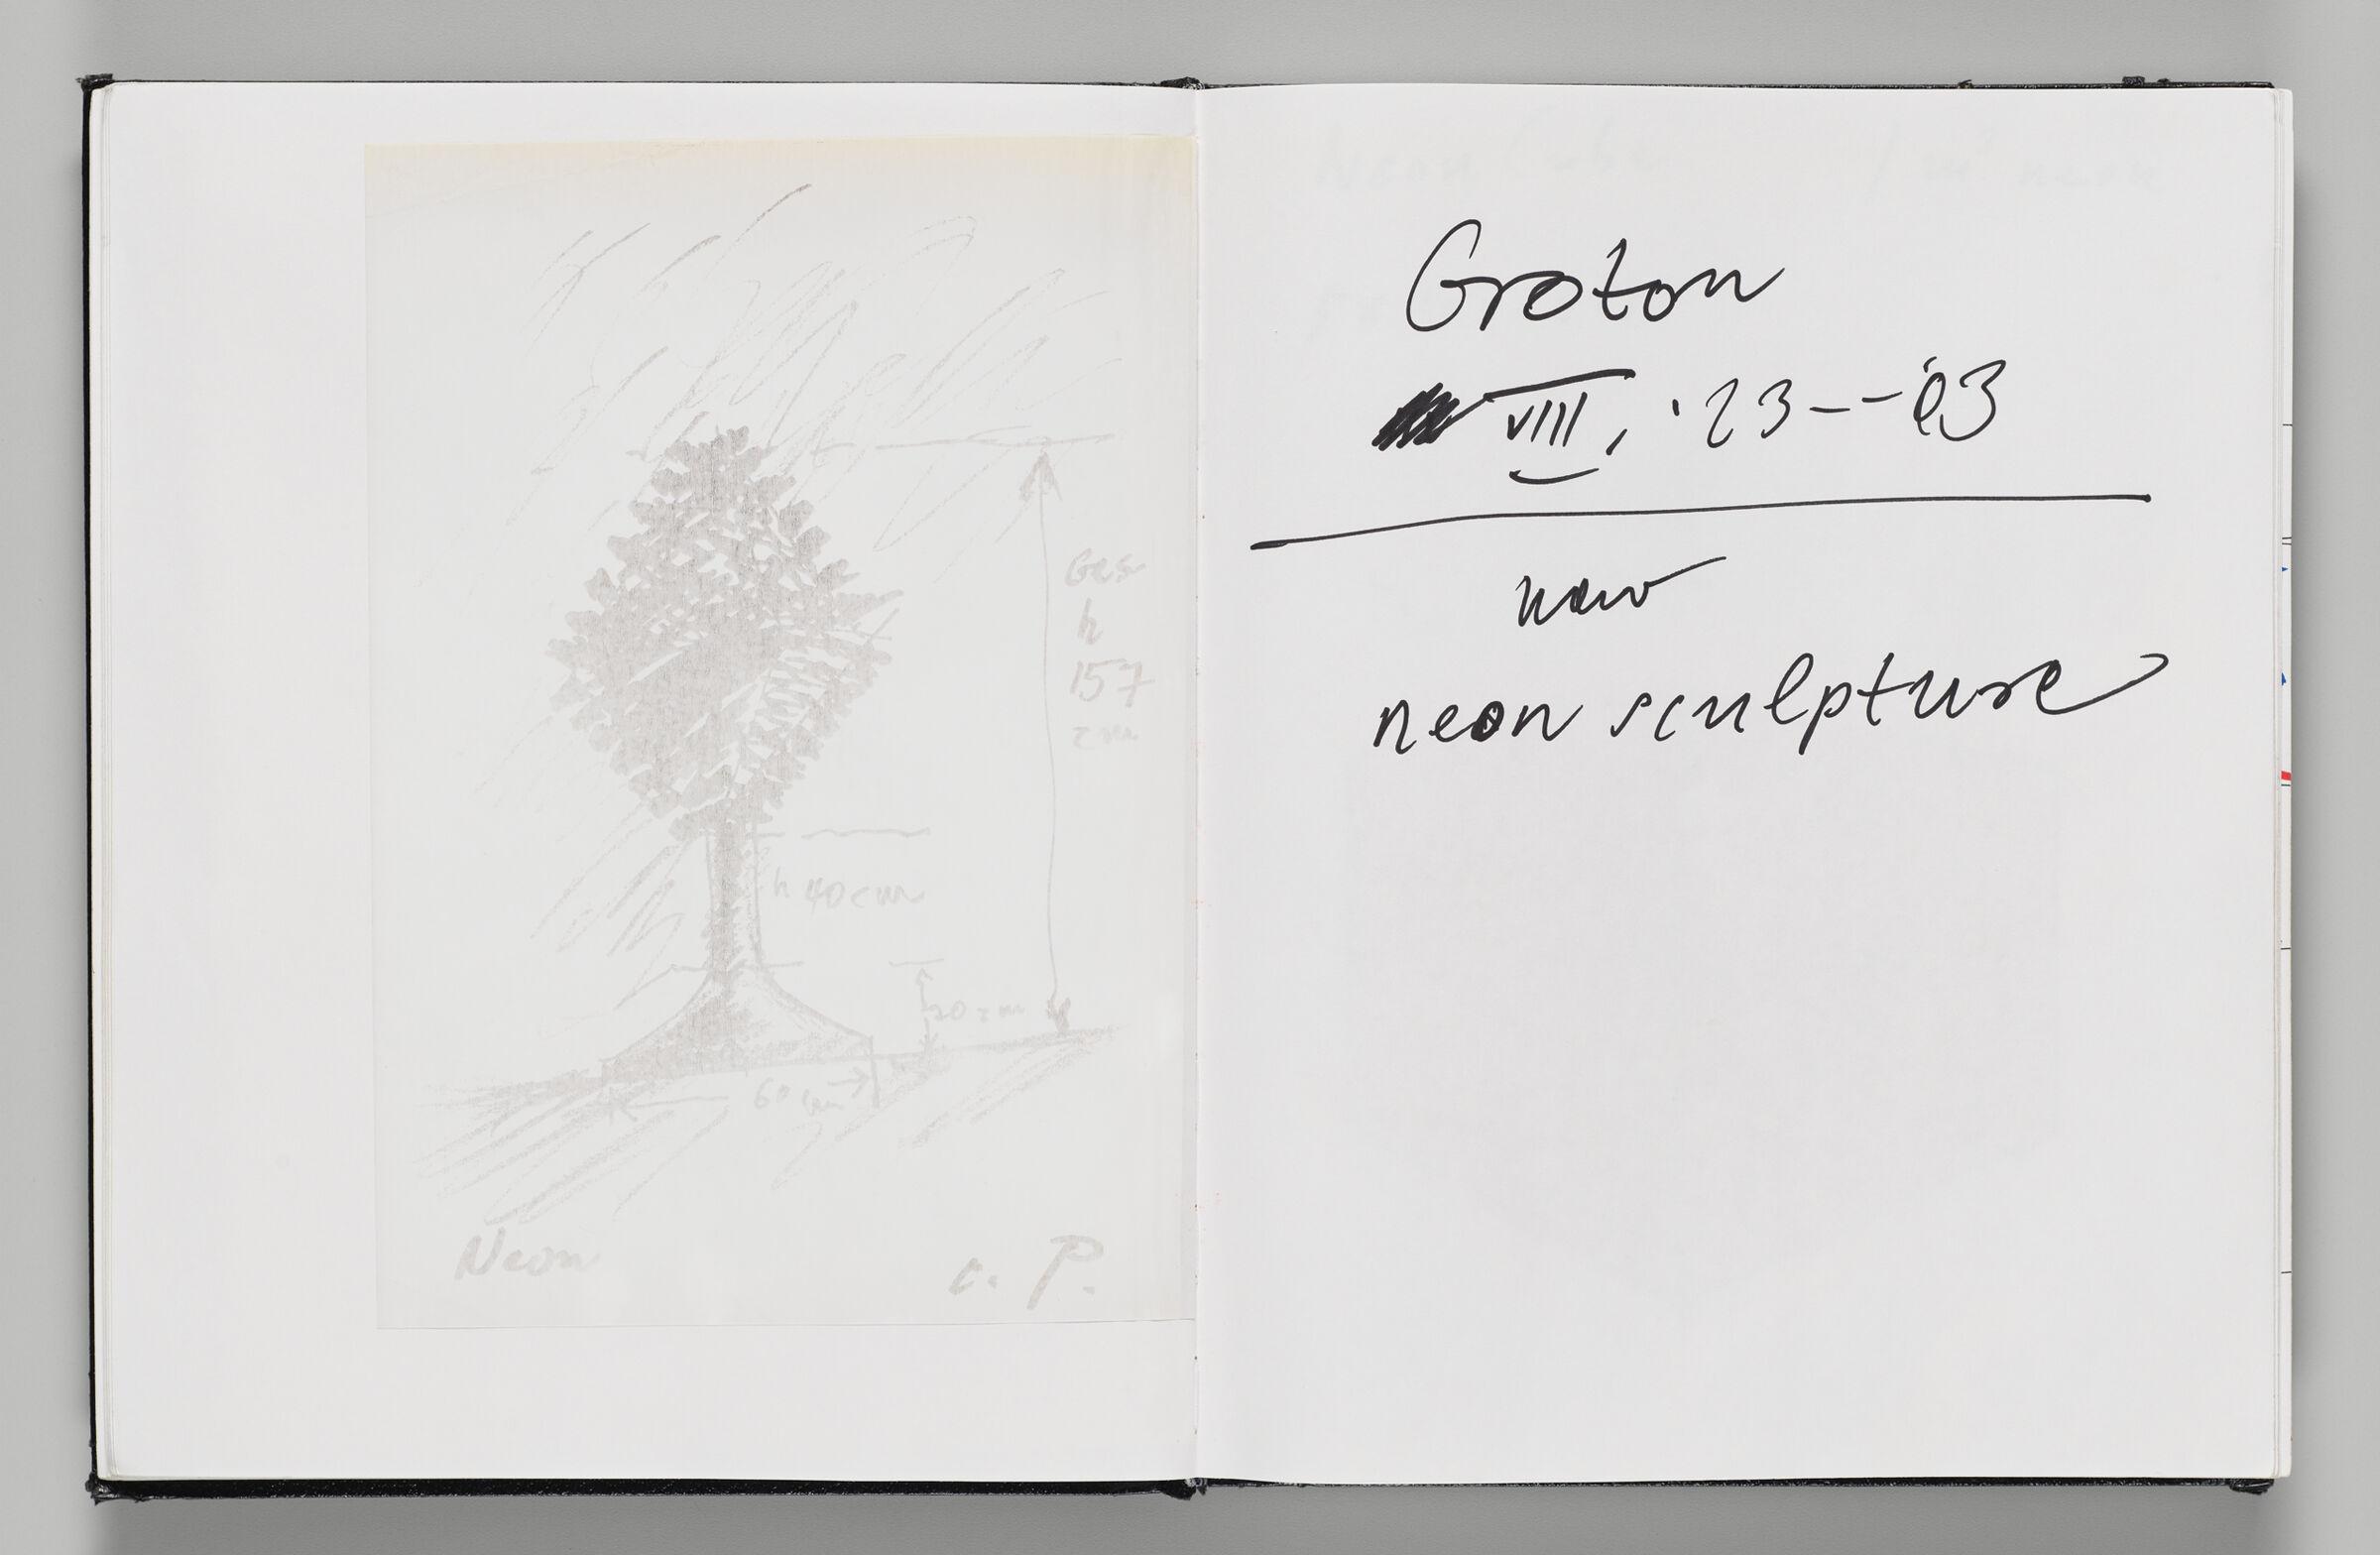 Untitled (Adhered Copy Of Sketch, Left Page); Untitled (Notes, Right Page)